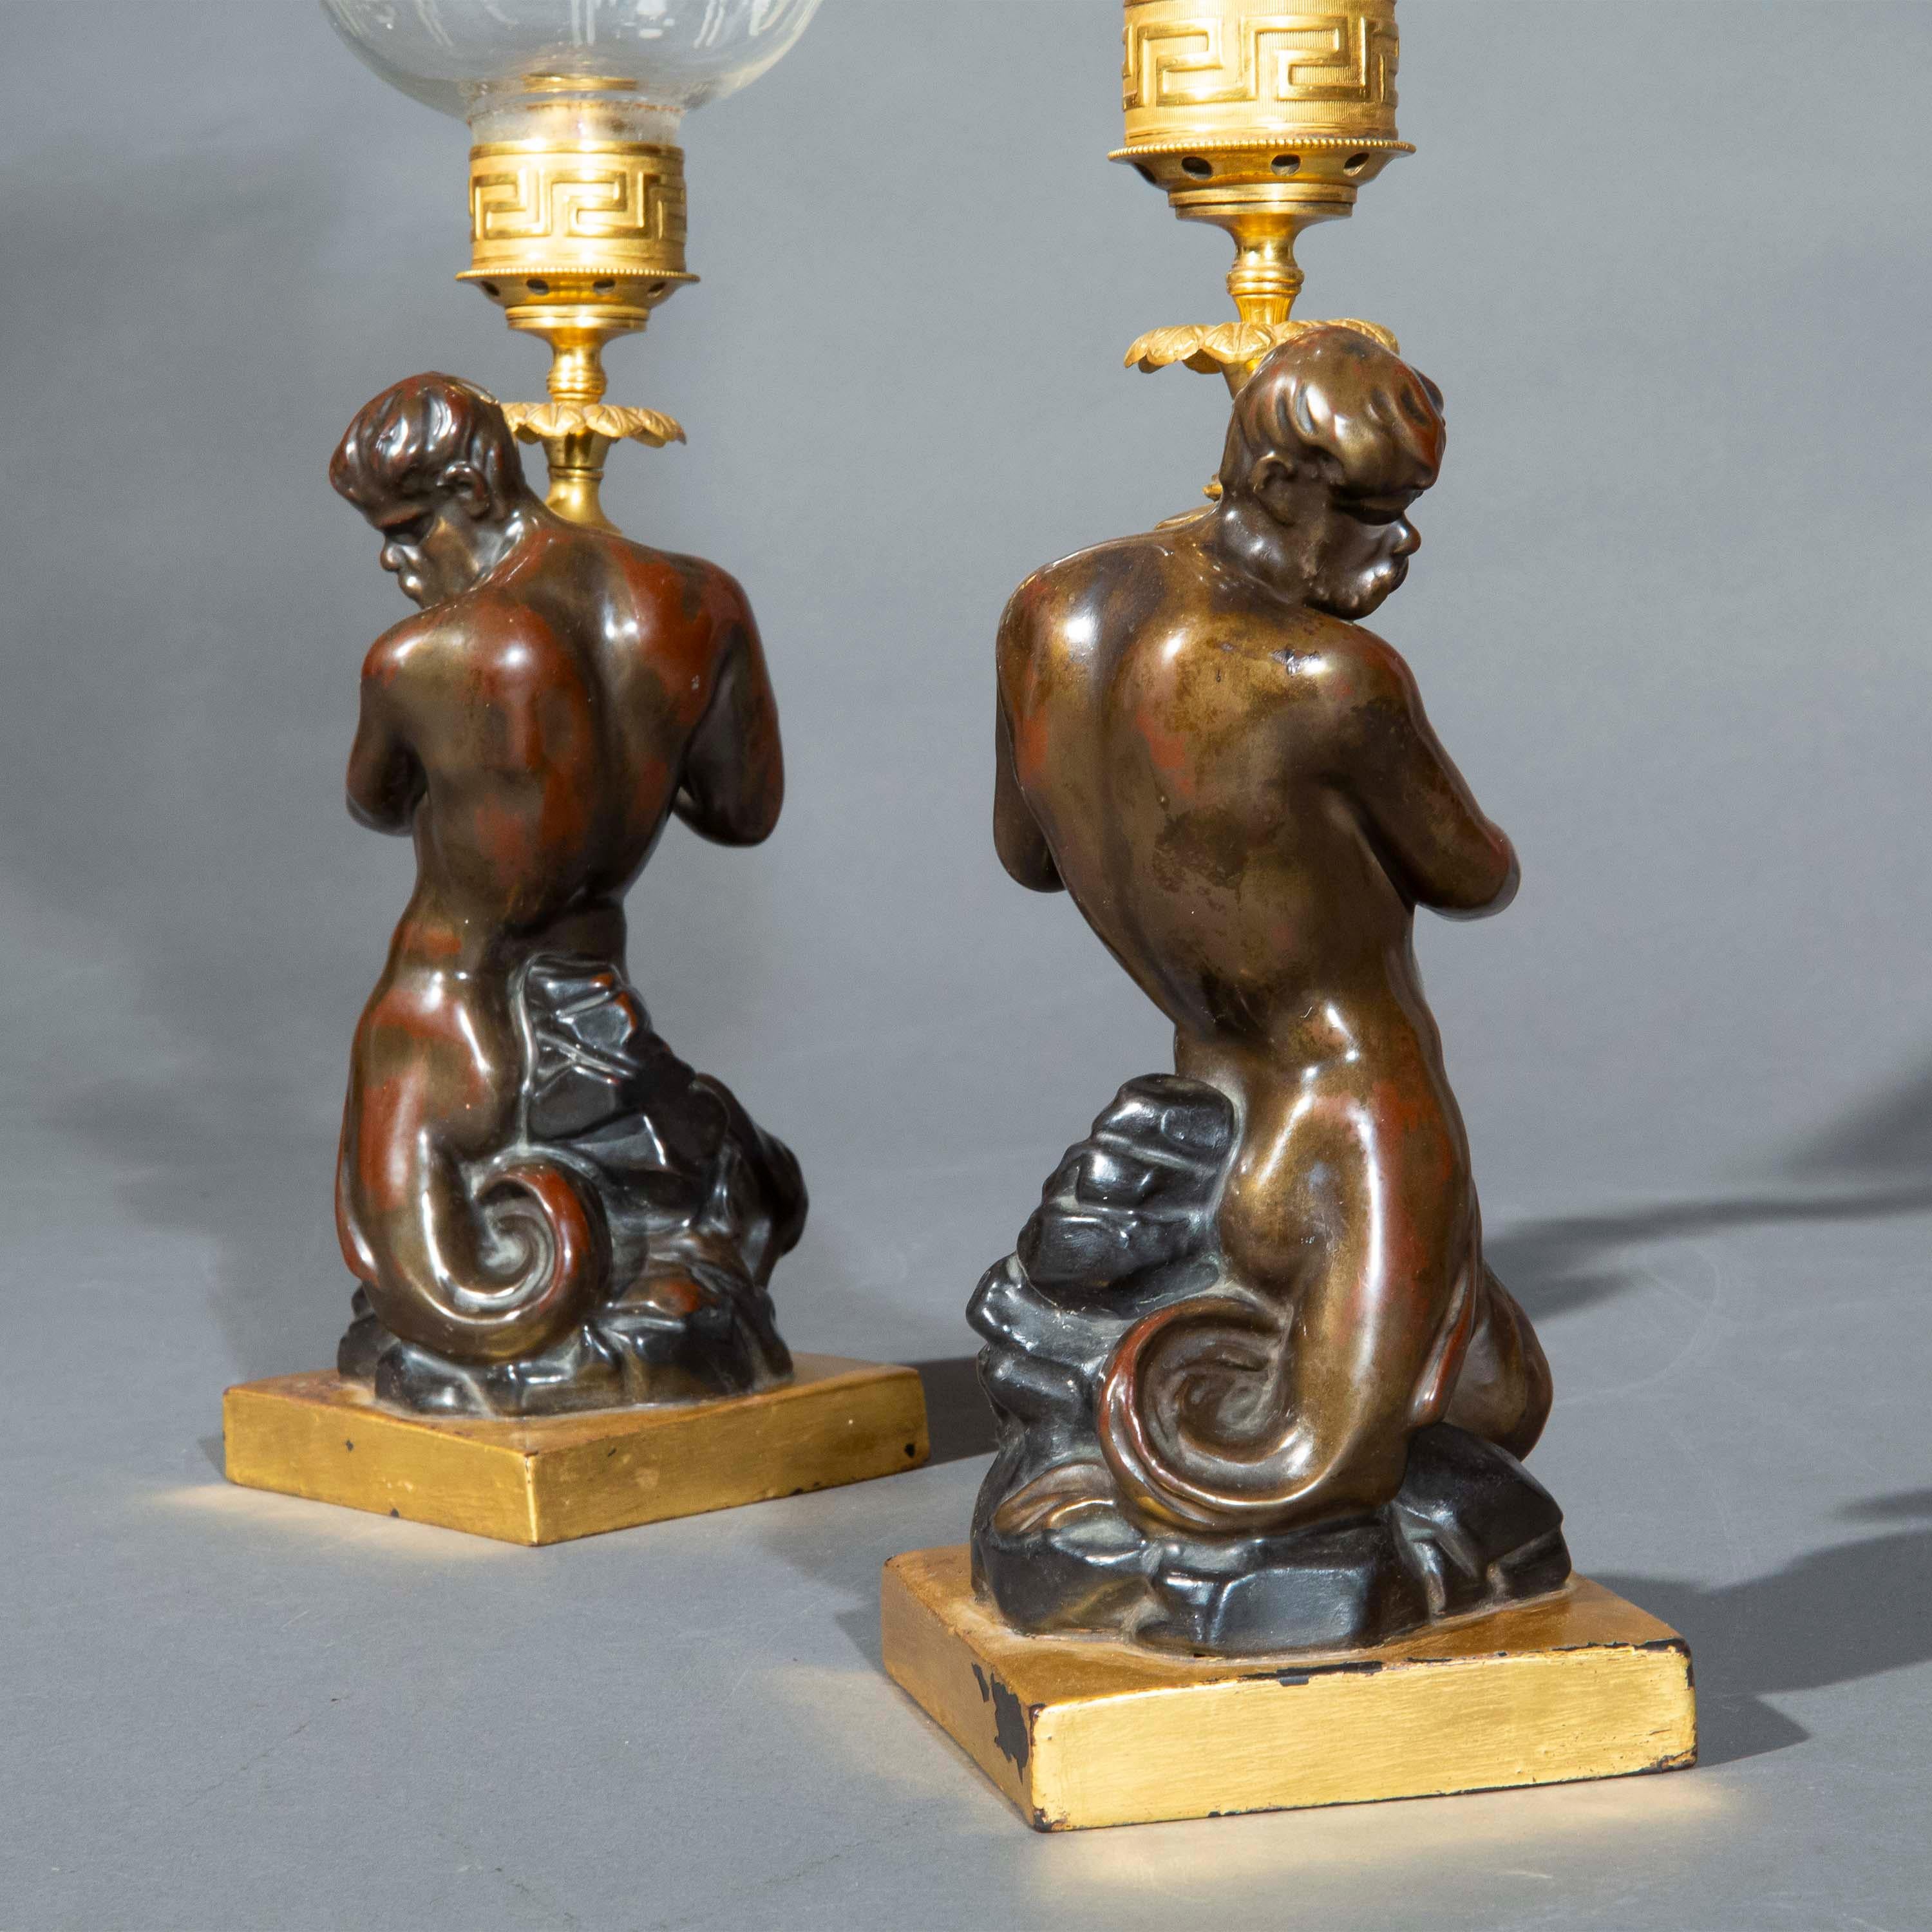 Regency Pair of Early 19th Century Triton Candlesticks Storm Lanterns by Wood & Caldwell For Sale